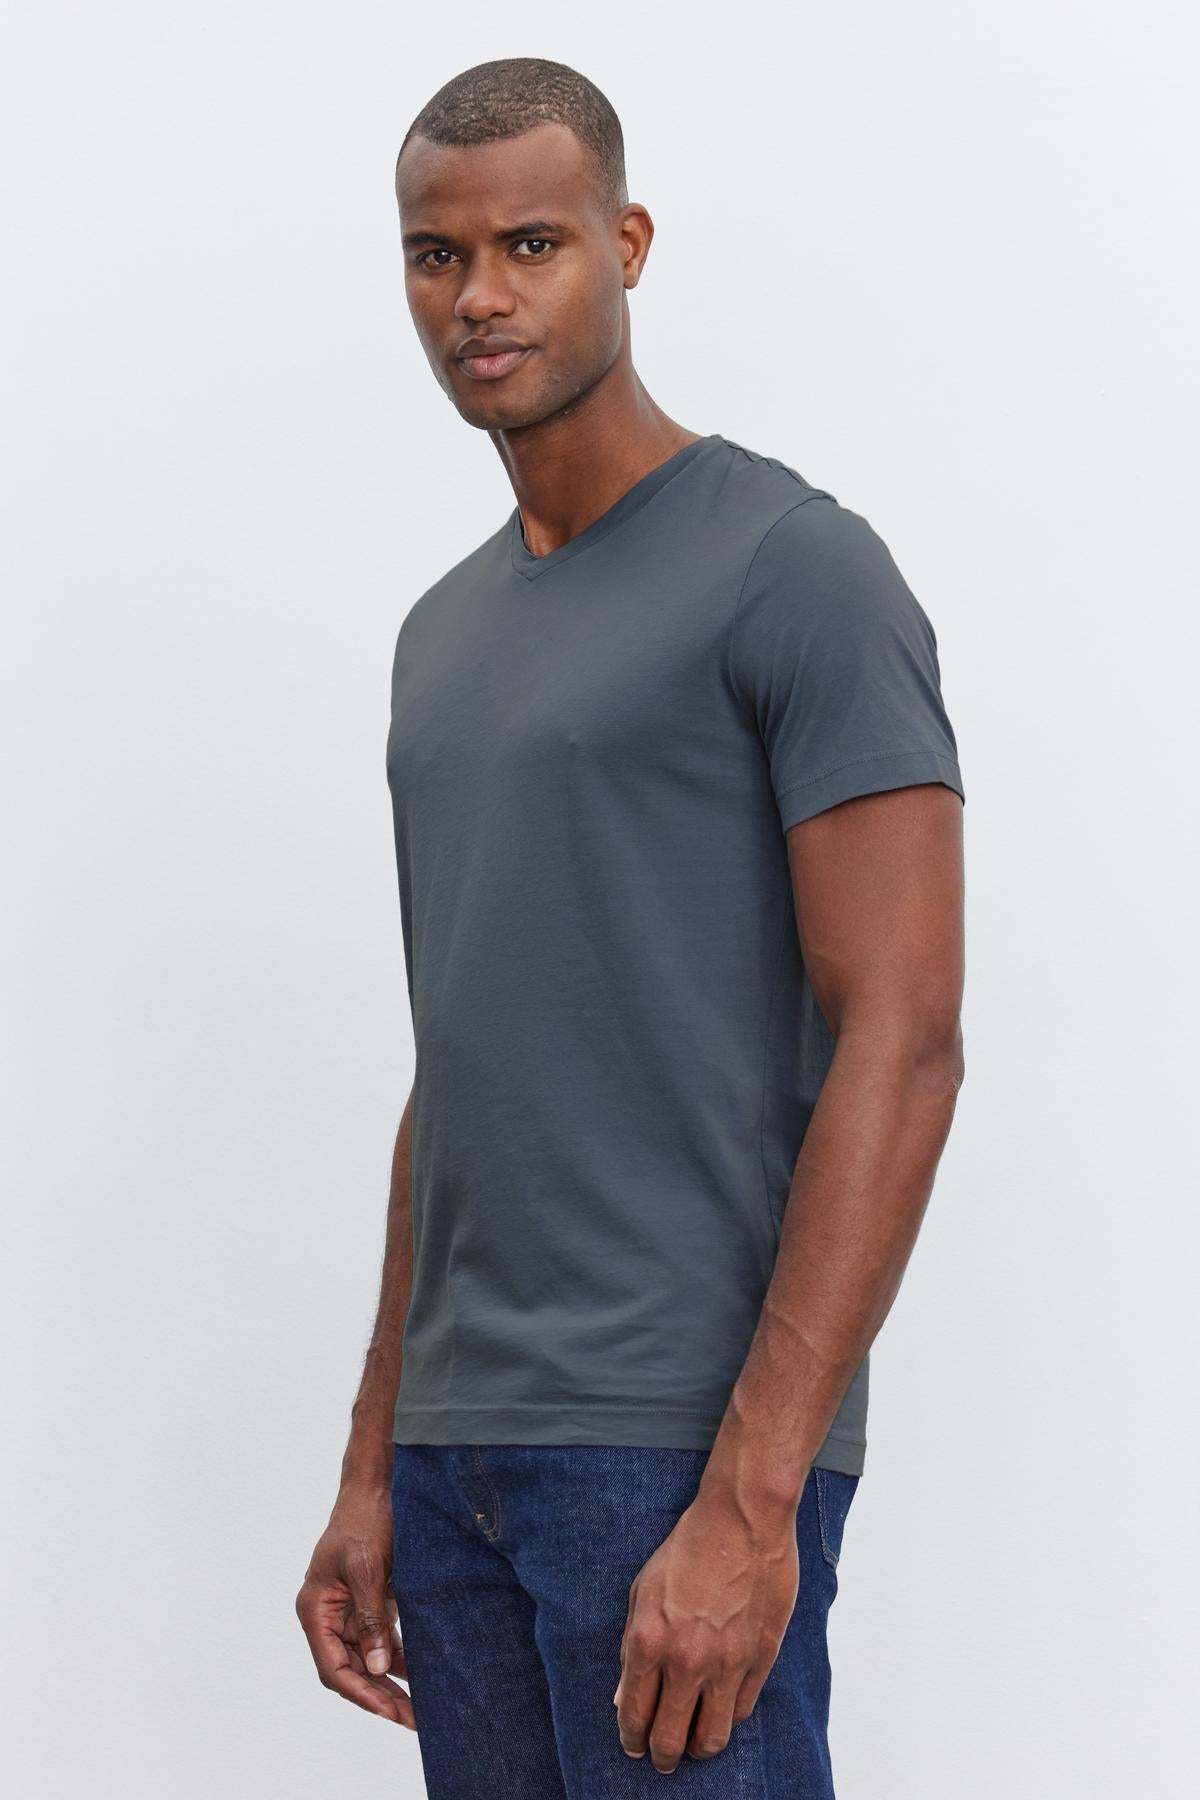 A man wearing a dark gray short-sleeve, v-neckline SAMSEN TEE by Velvet by Graham & Spencer and blue jeans stands against a plain light background. He is looking directly at the camera, embodying effortless everyday wear.-37386135437505